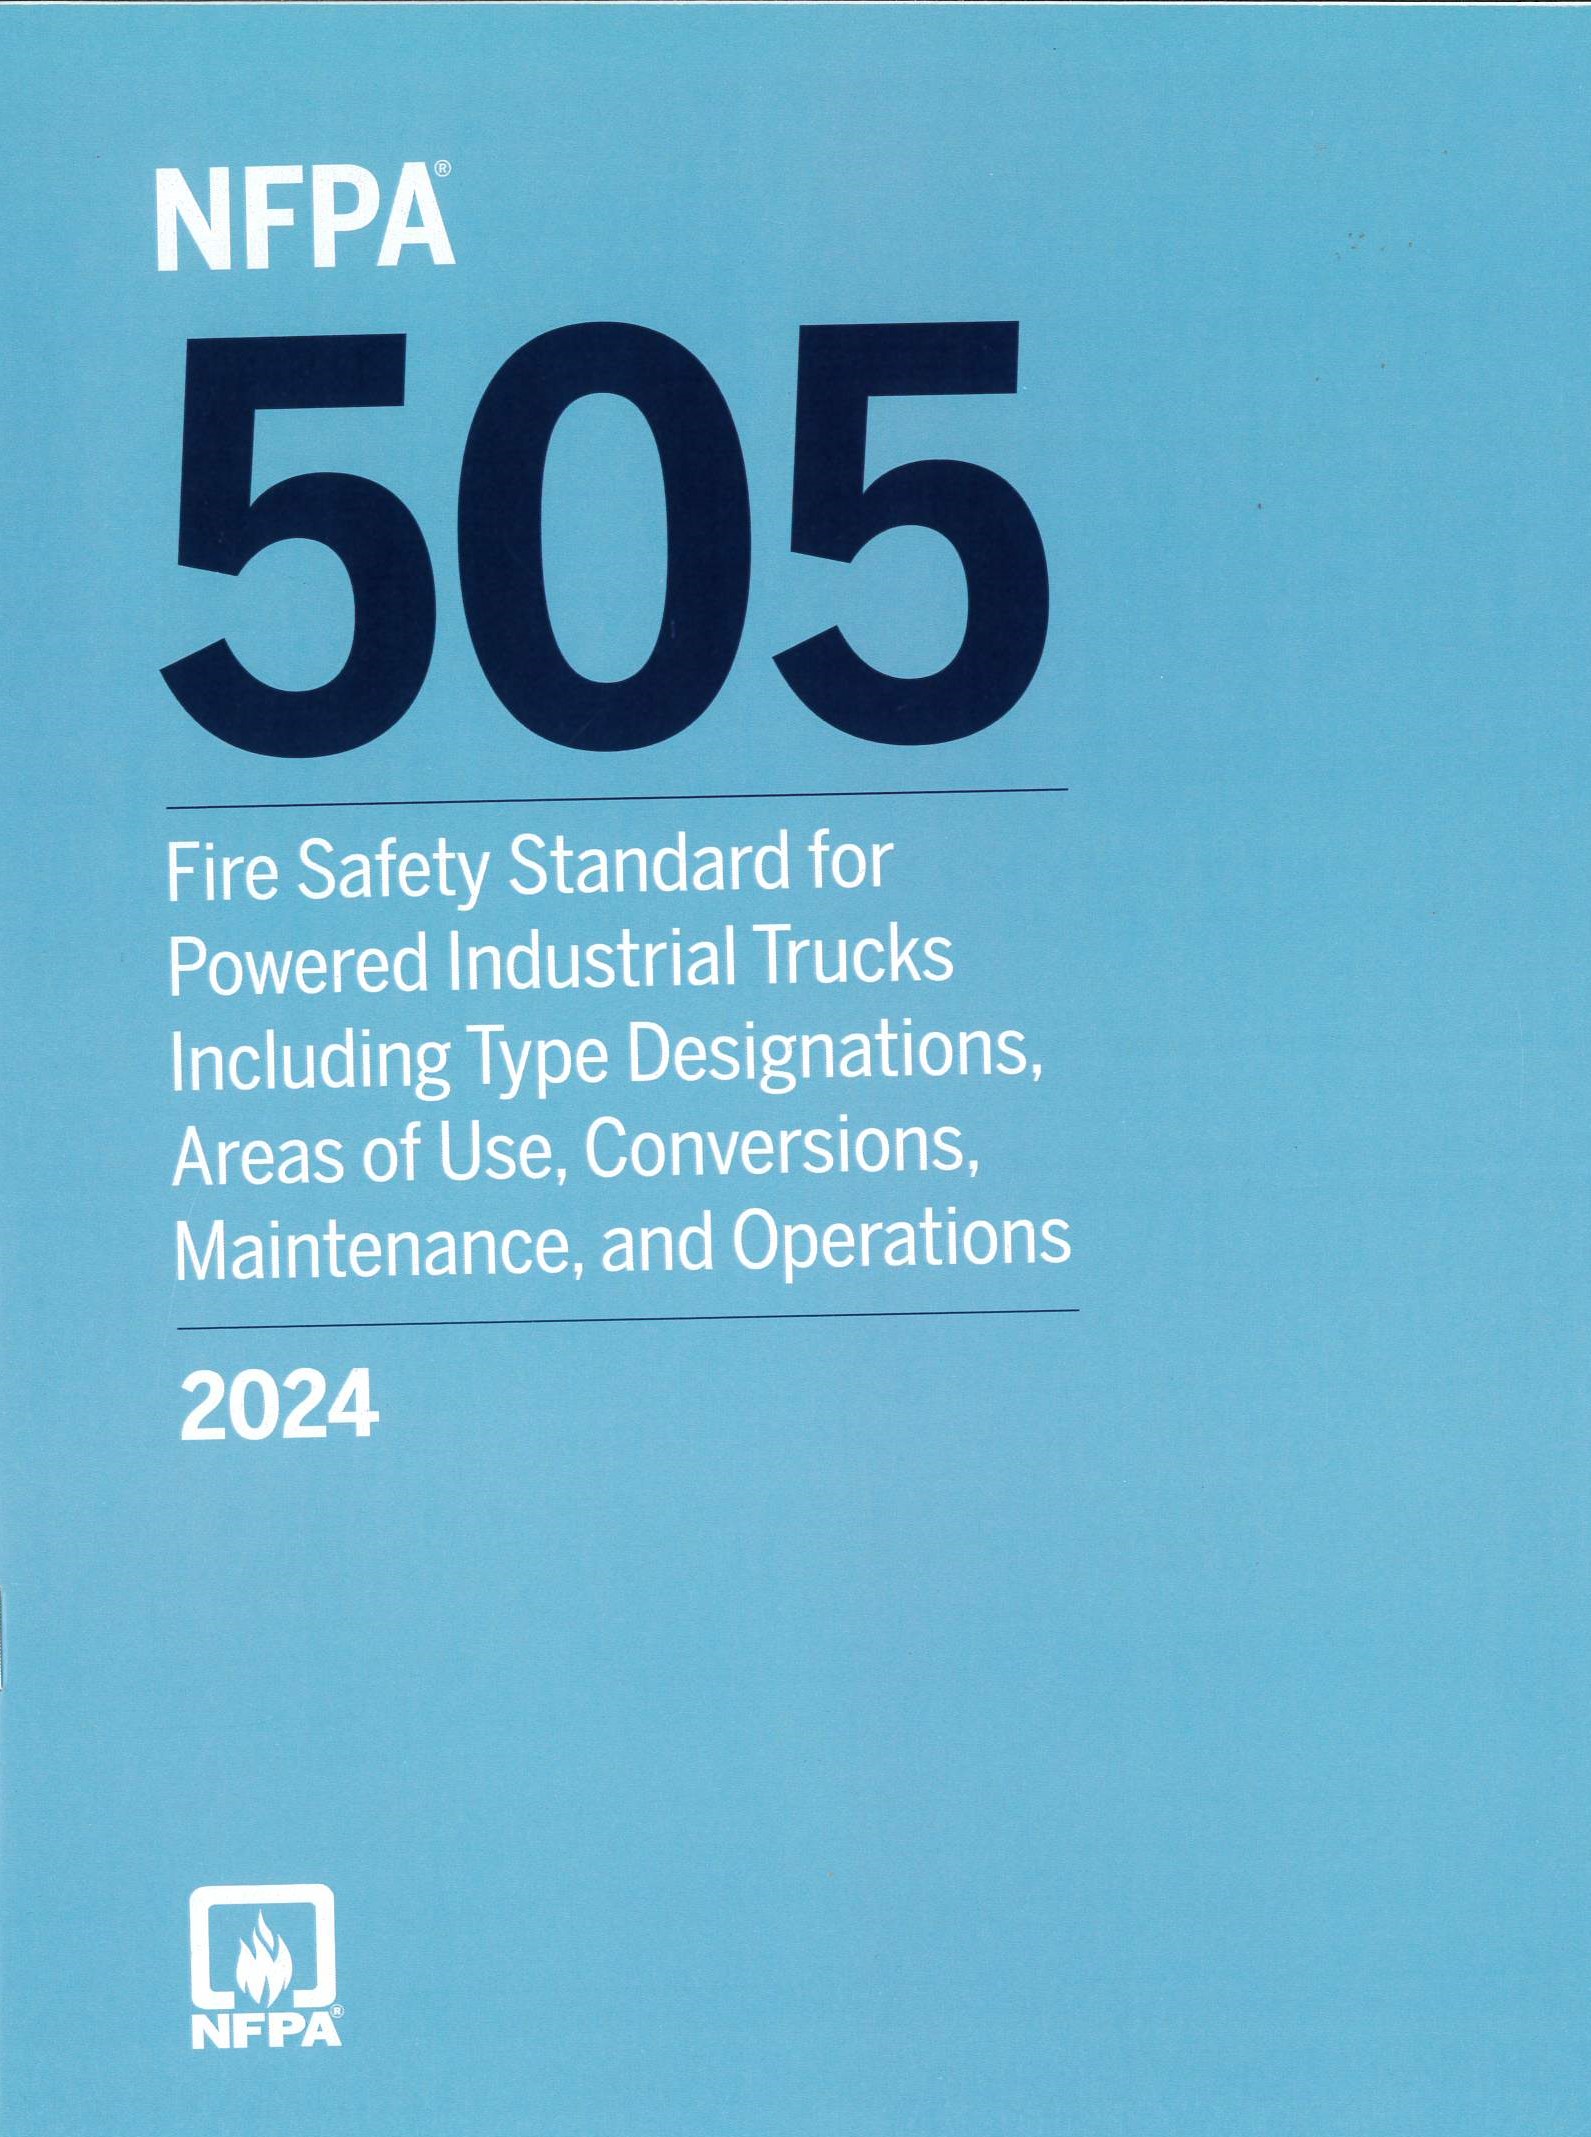 NFPA 505 2024 Fire Safety Standard for Powered Industrial Trucks 